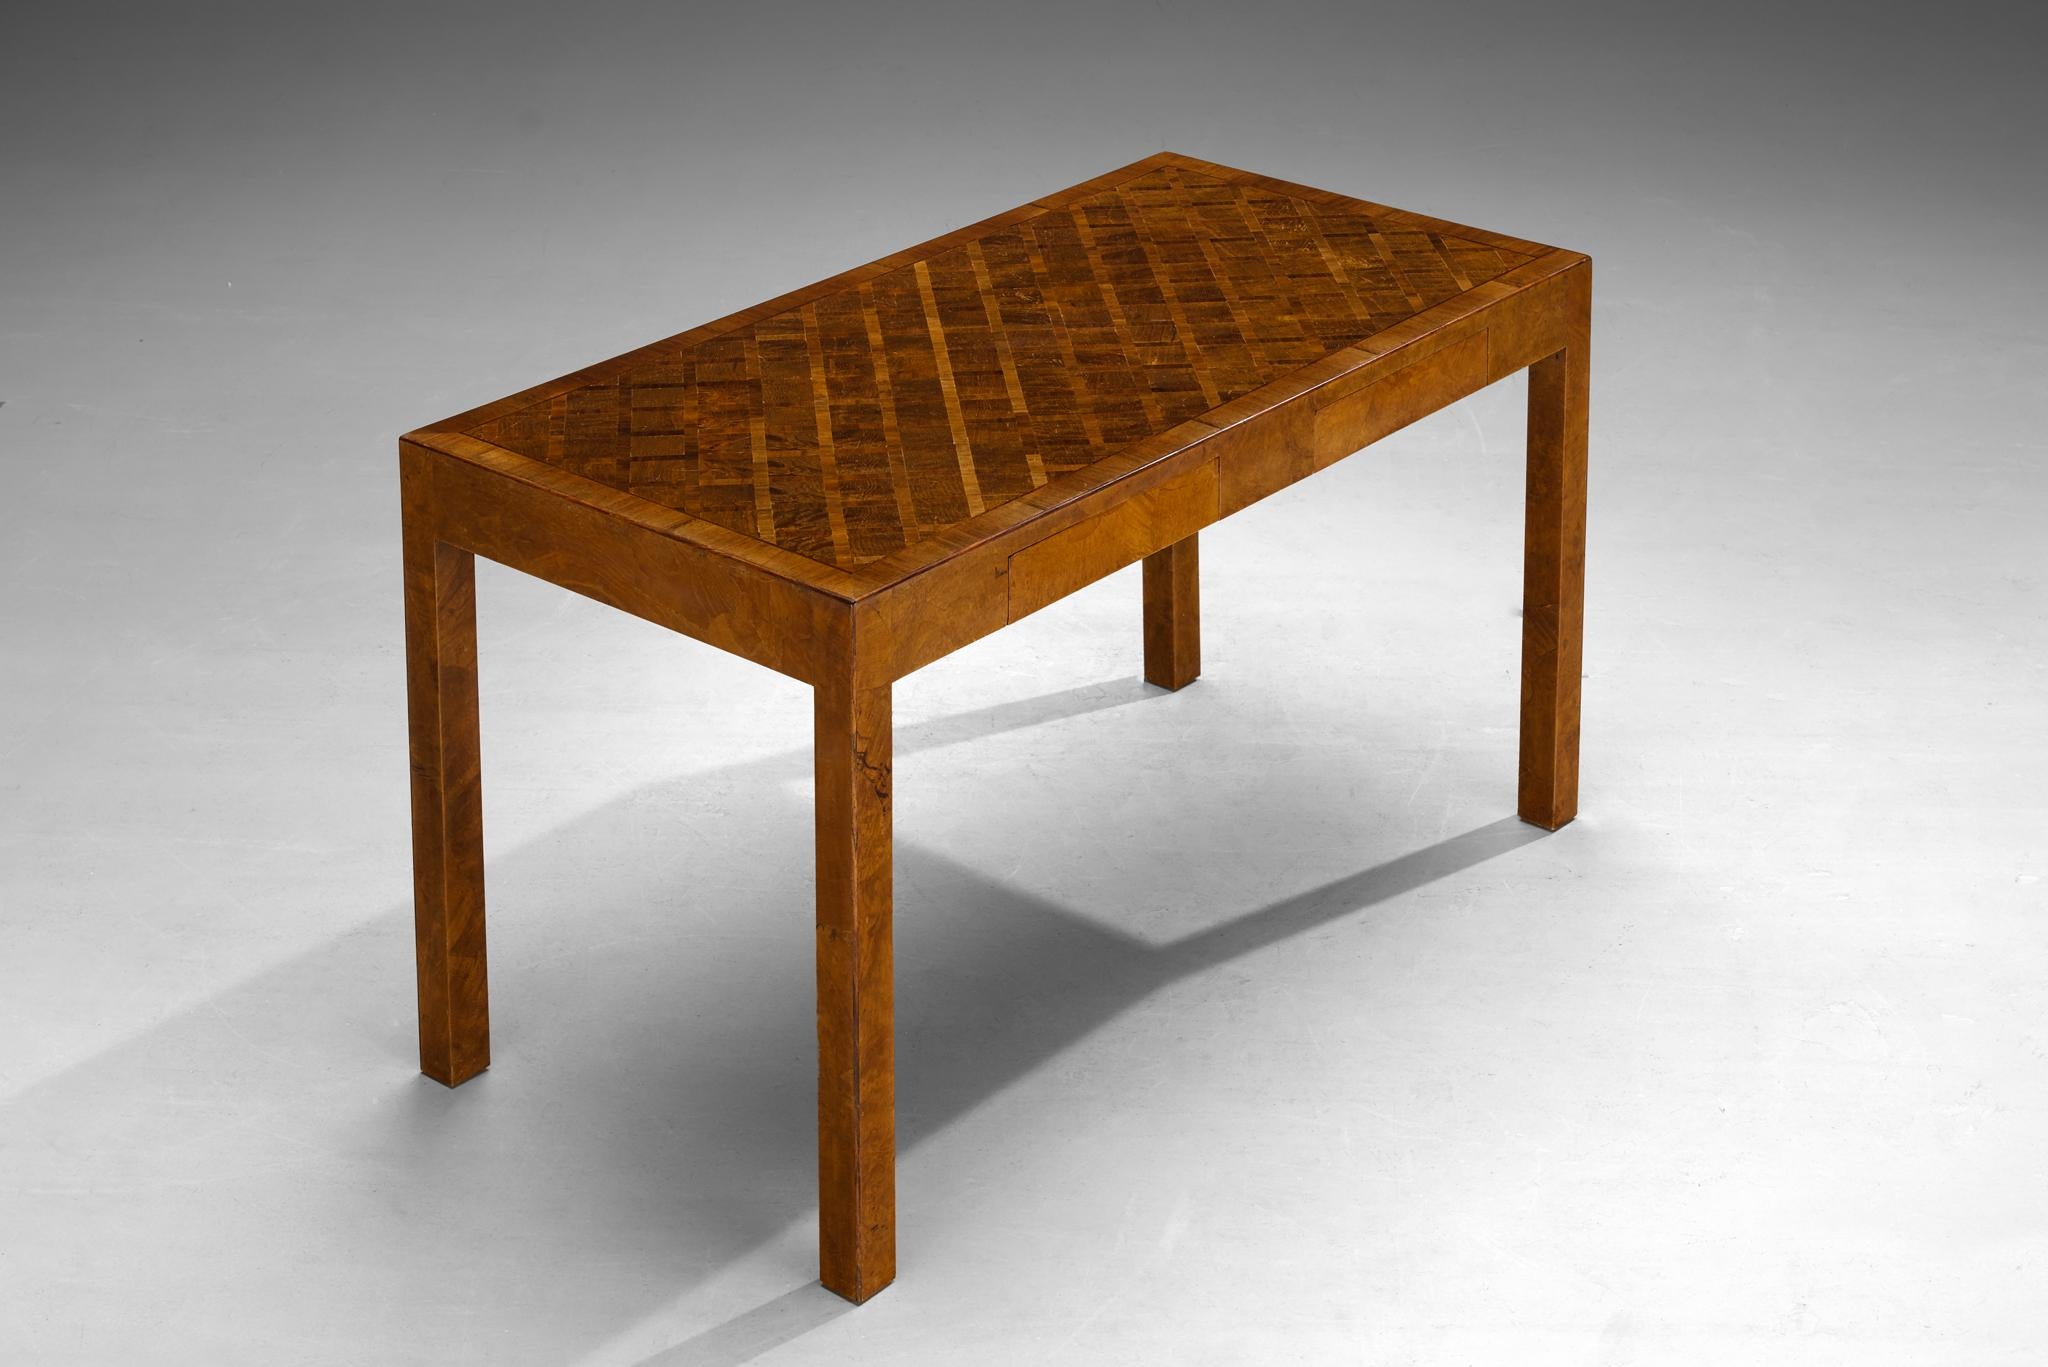 Writing table, walnut, The Netherlands, 1940s

An elegant furniture piece that attests to masterful craftsmanship. Its marquetry top, adorned with a captivating array of various wood species meticulously arranged in a geometric pattern, evokes a